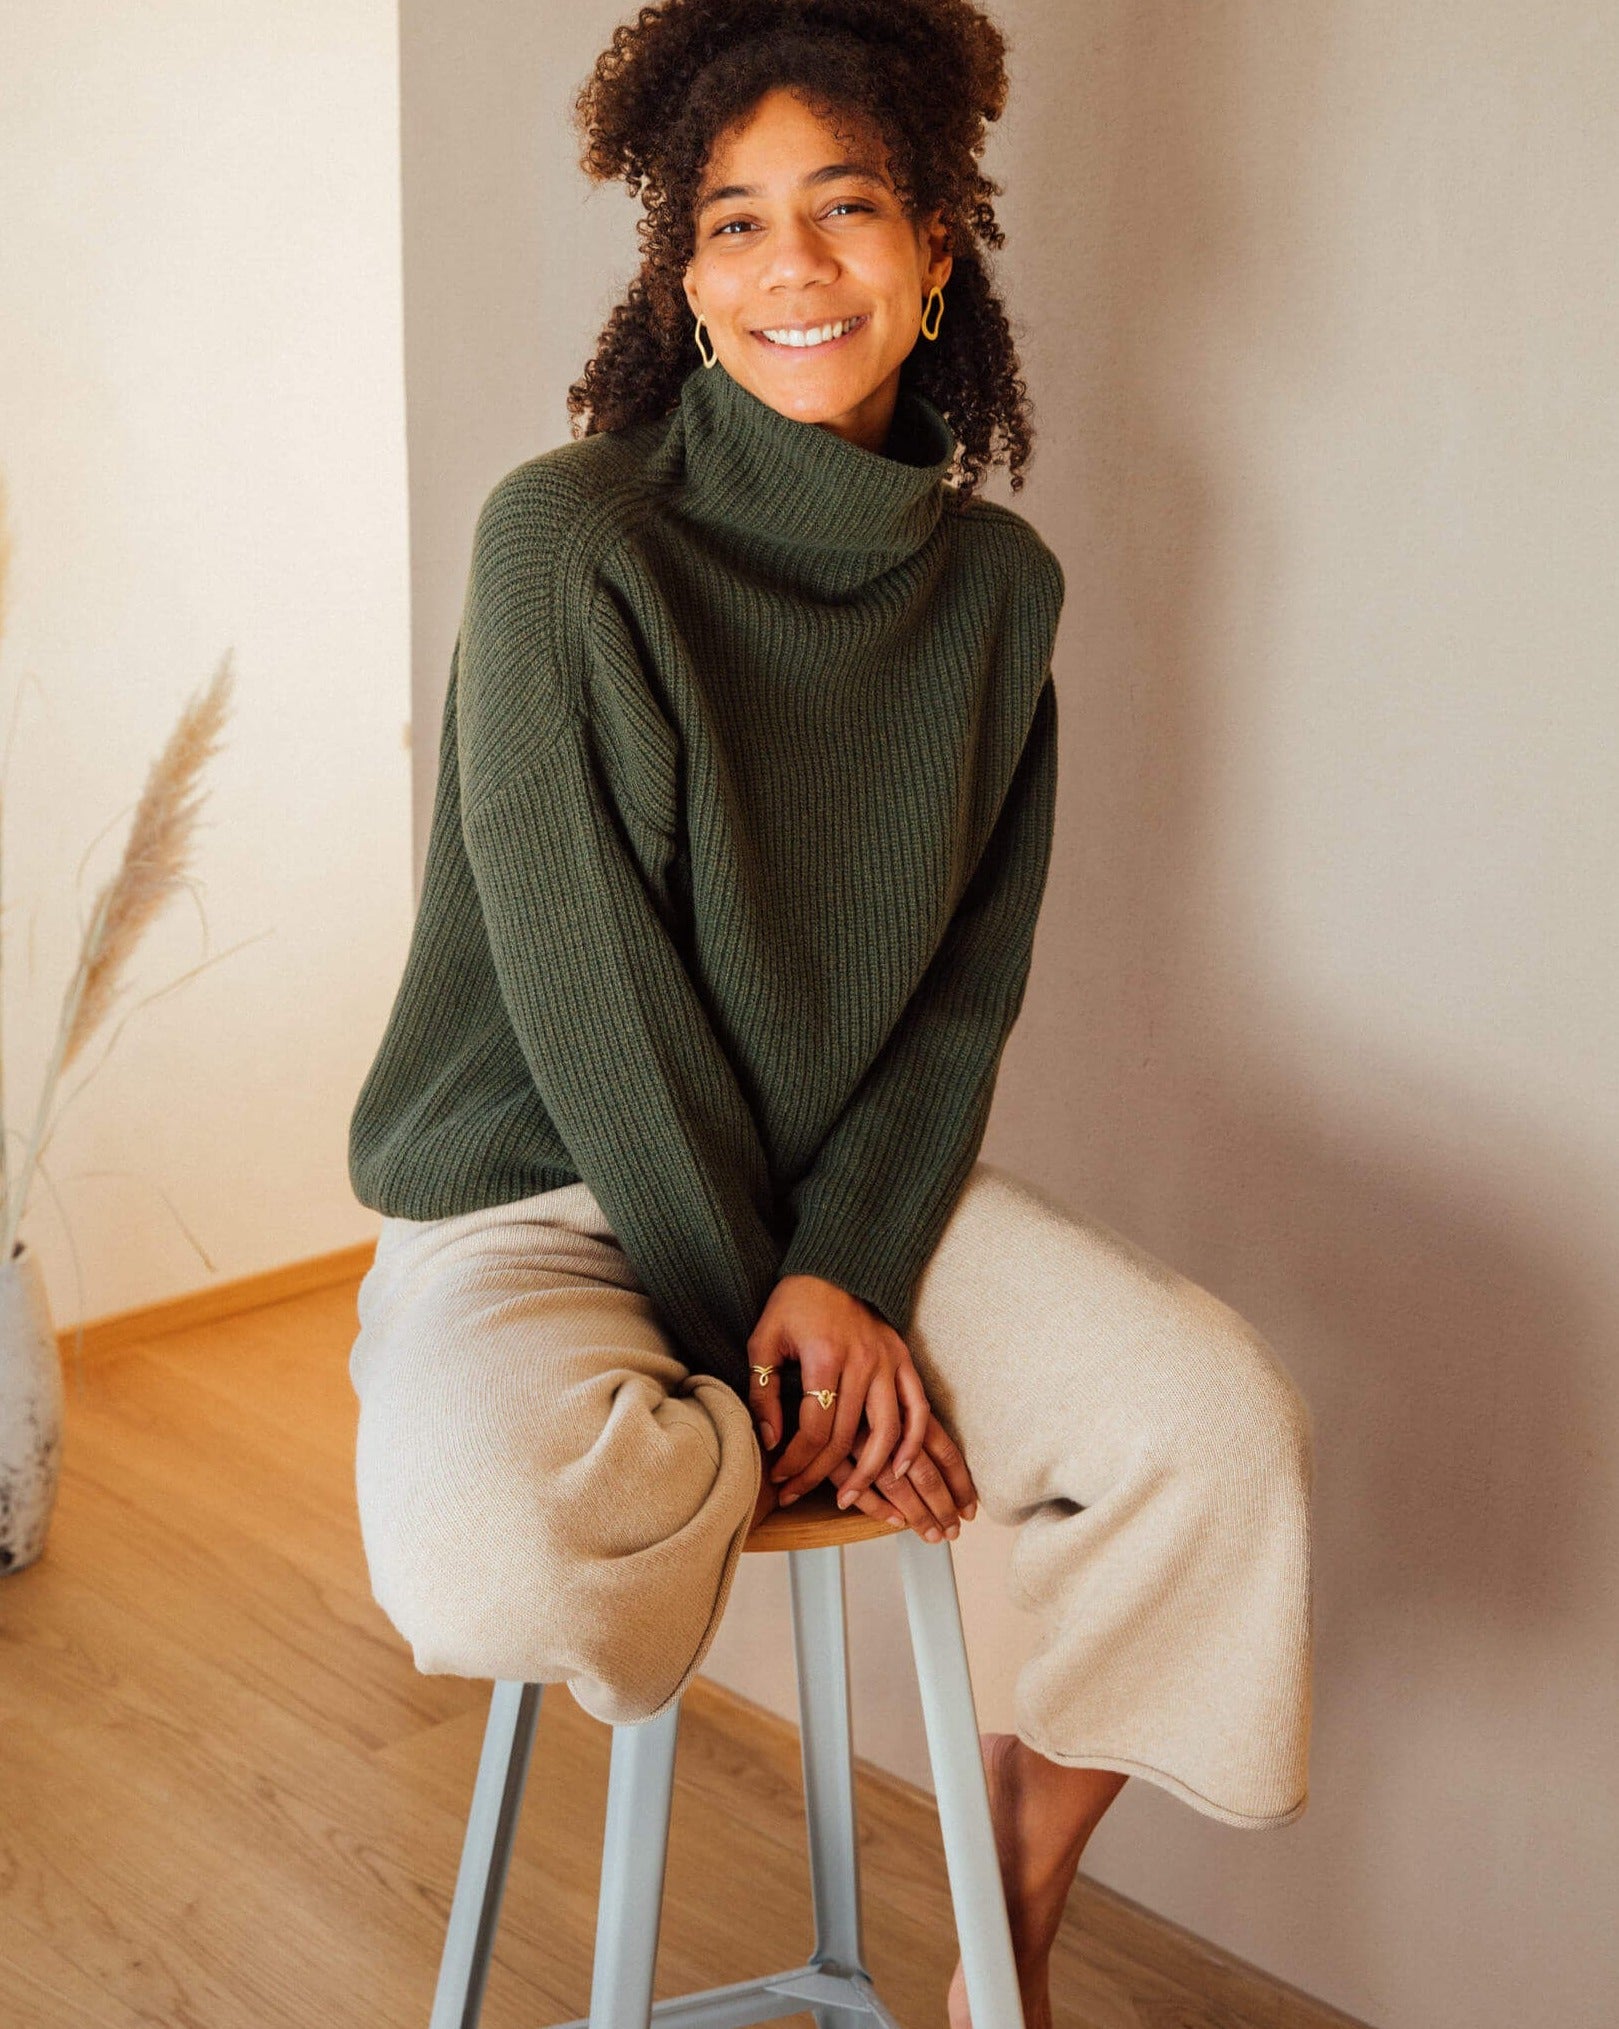 Loden green turtleneck sweater from Matona made from recycled wool blend